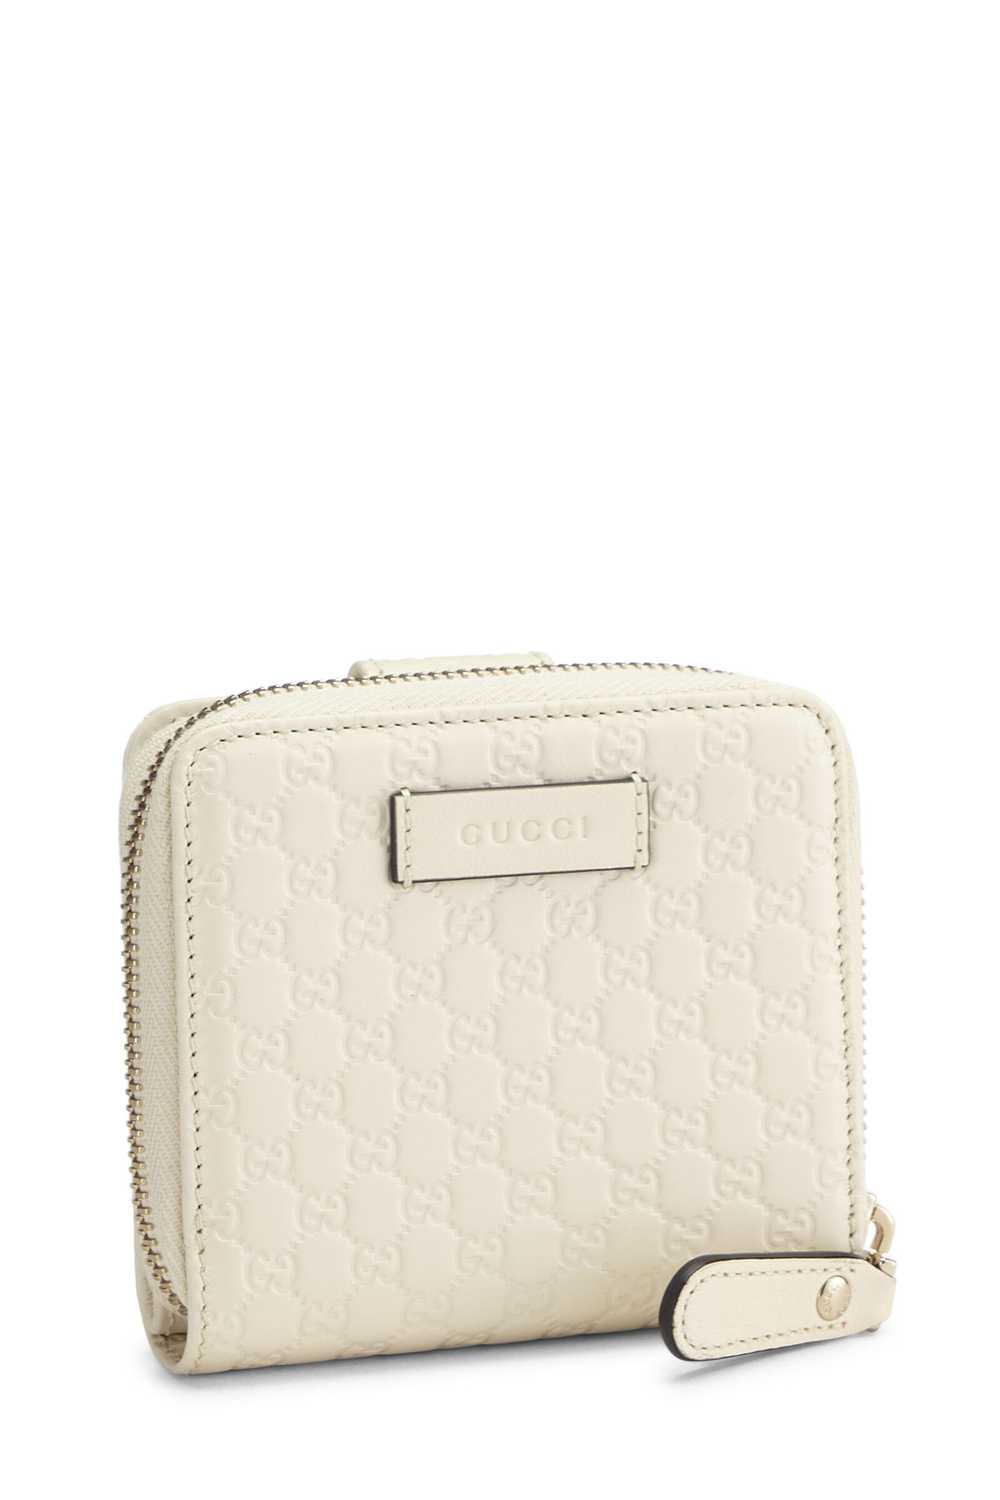 White Microguccissima French Compact Zip Wallet - image 2